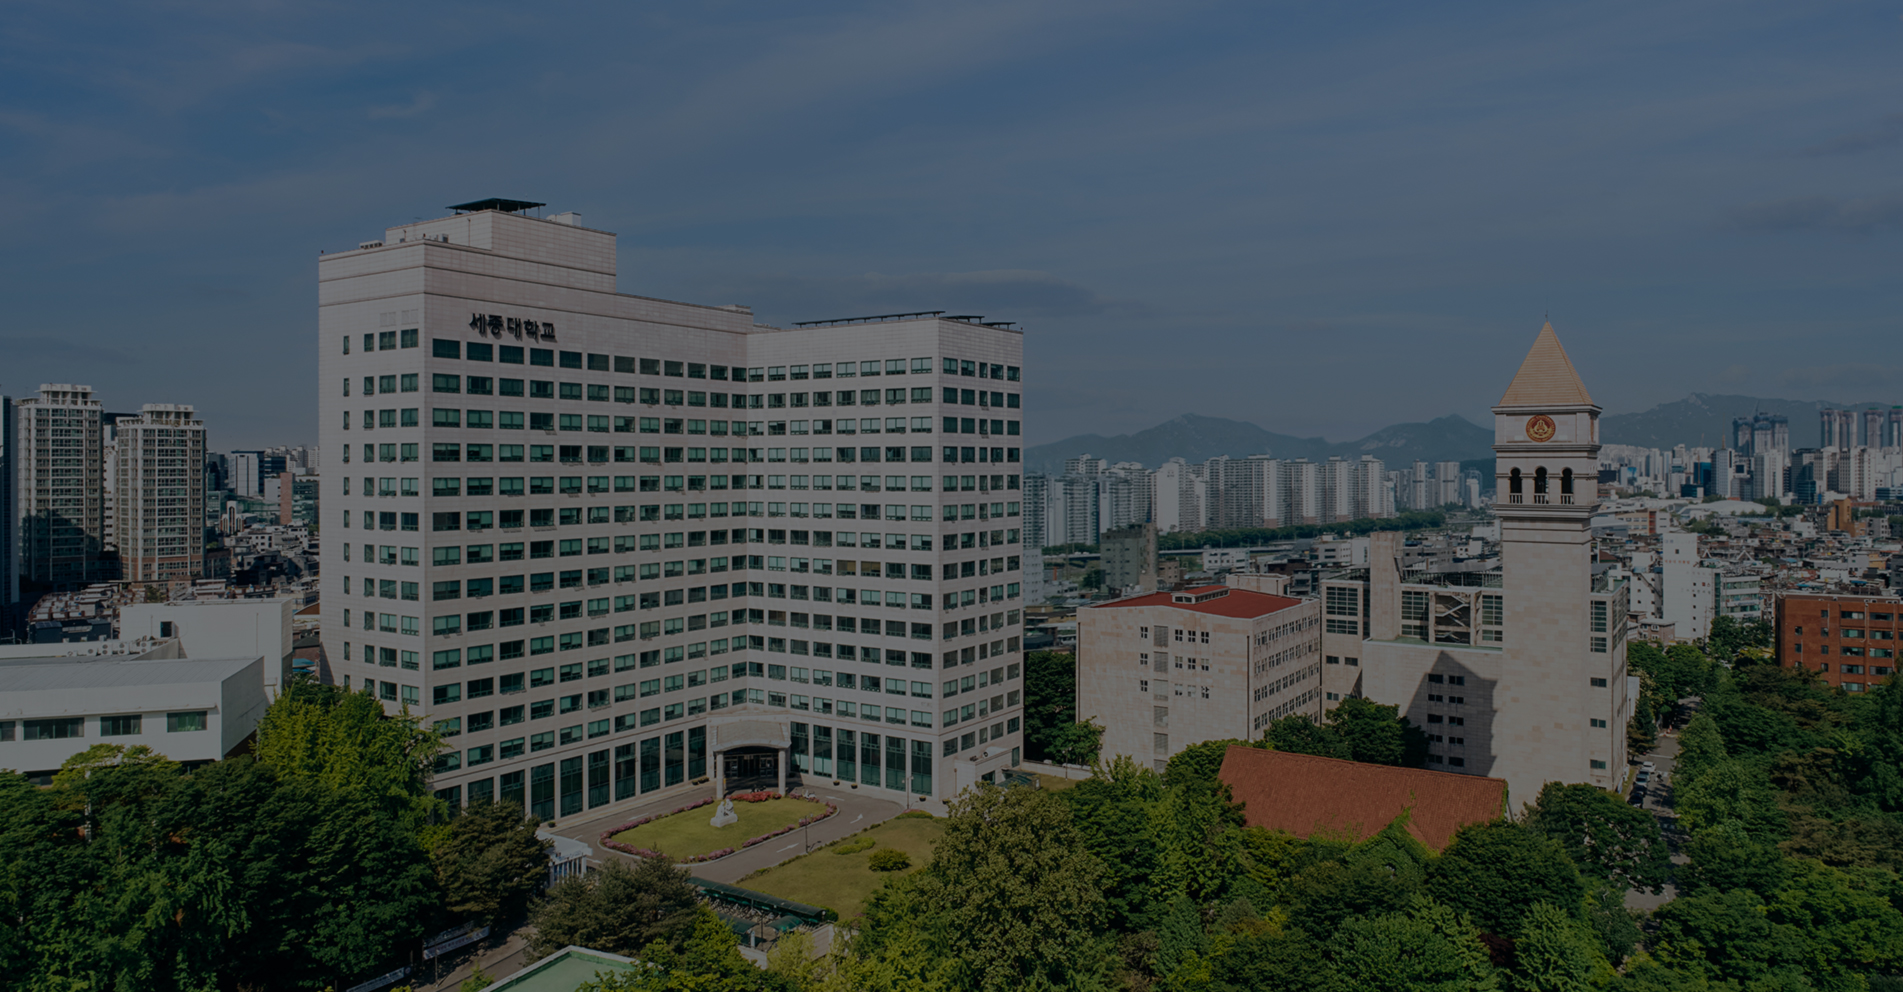 Sejong is the Top Korean University for International Research Collaborations